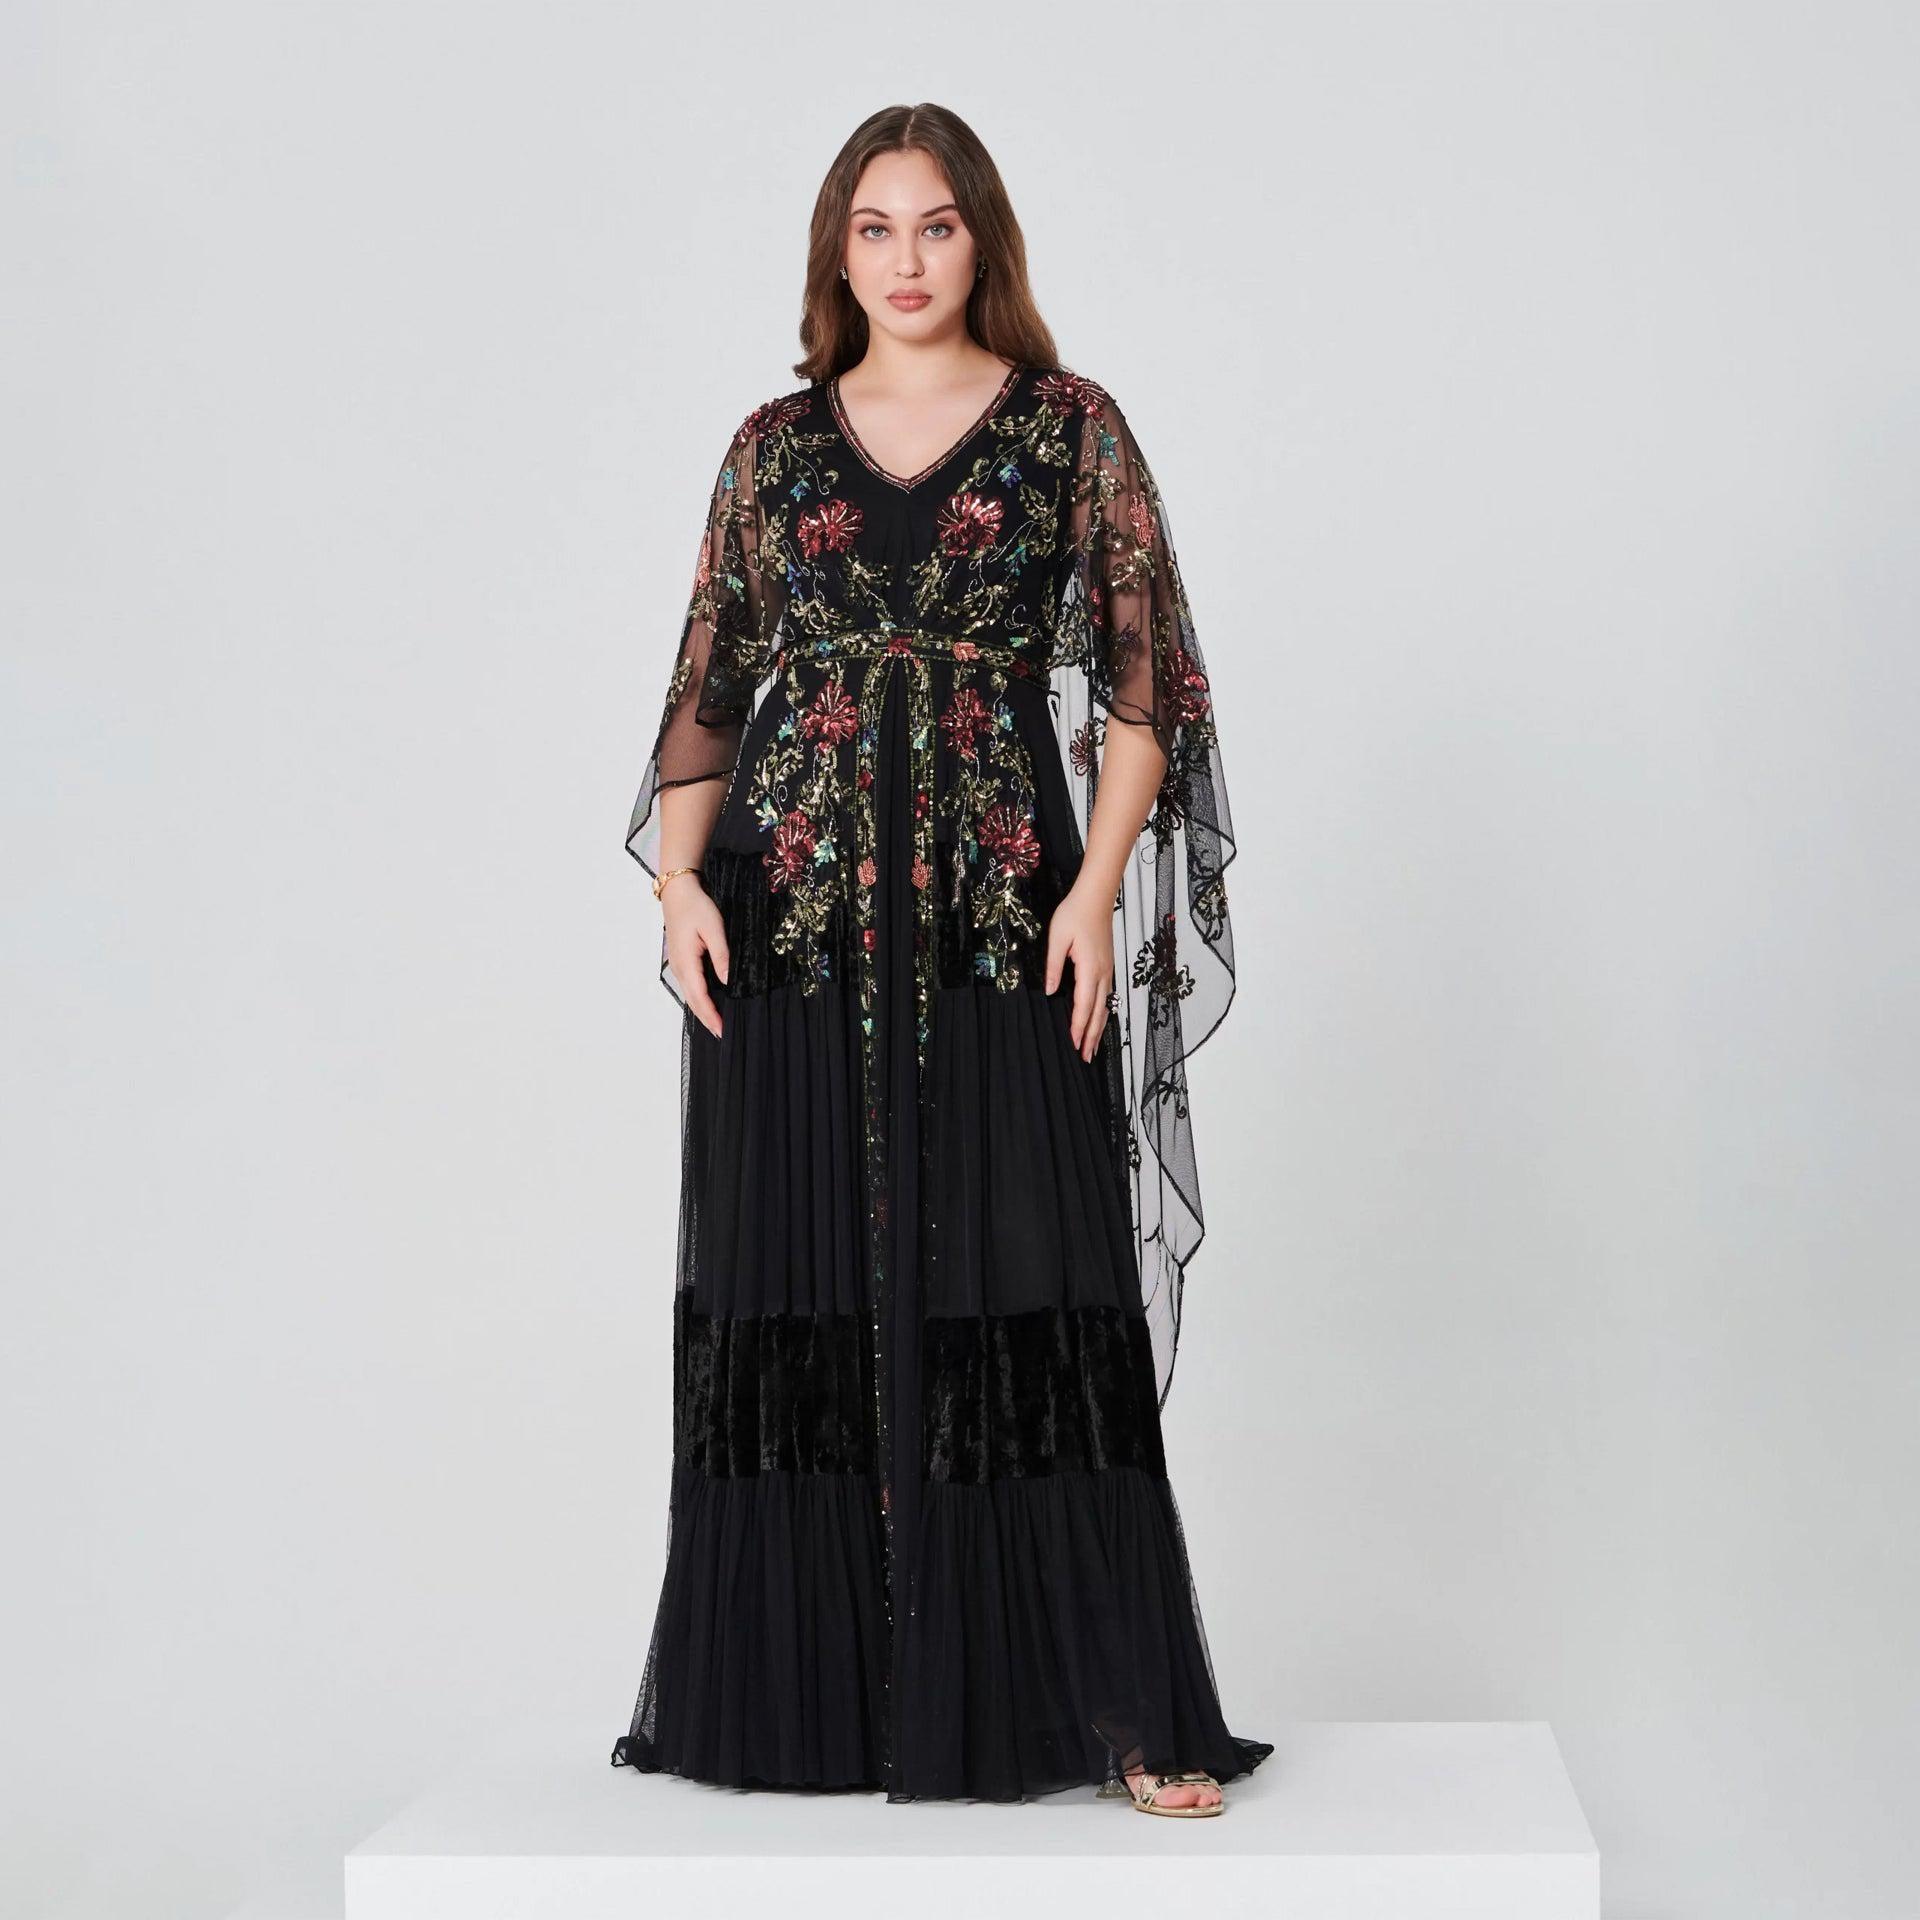 Black Embroidery Dress From Shalky - WECRE8